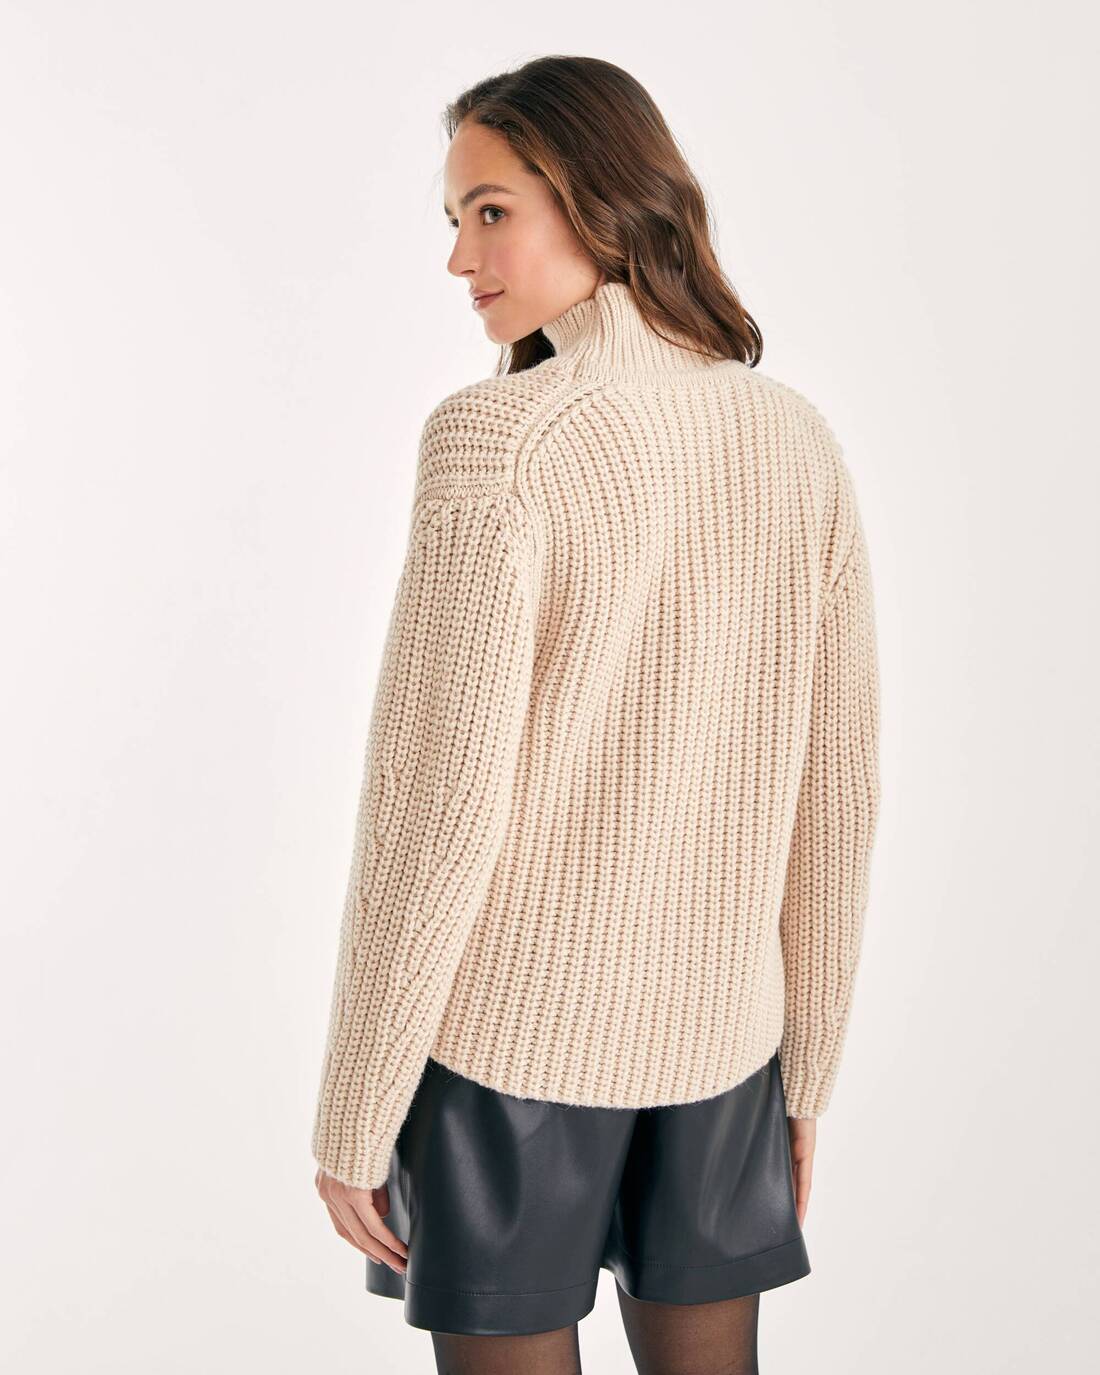 Asymmetrical knitted sweater 